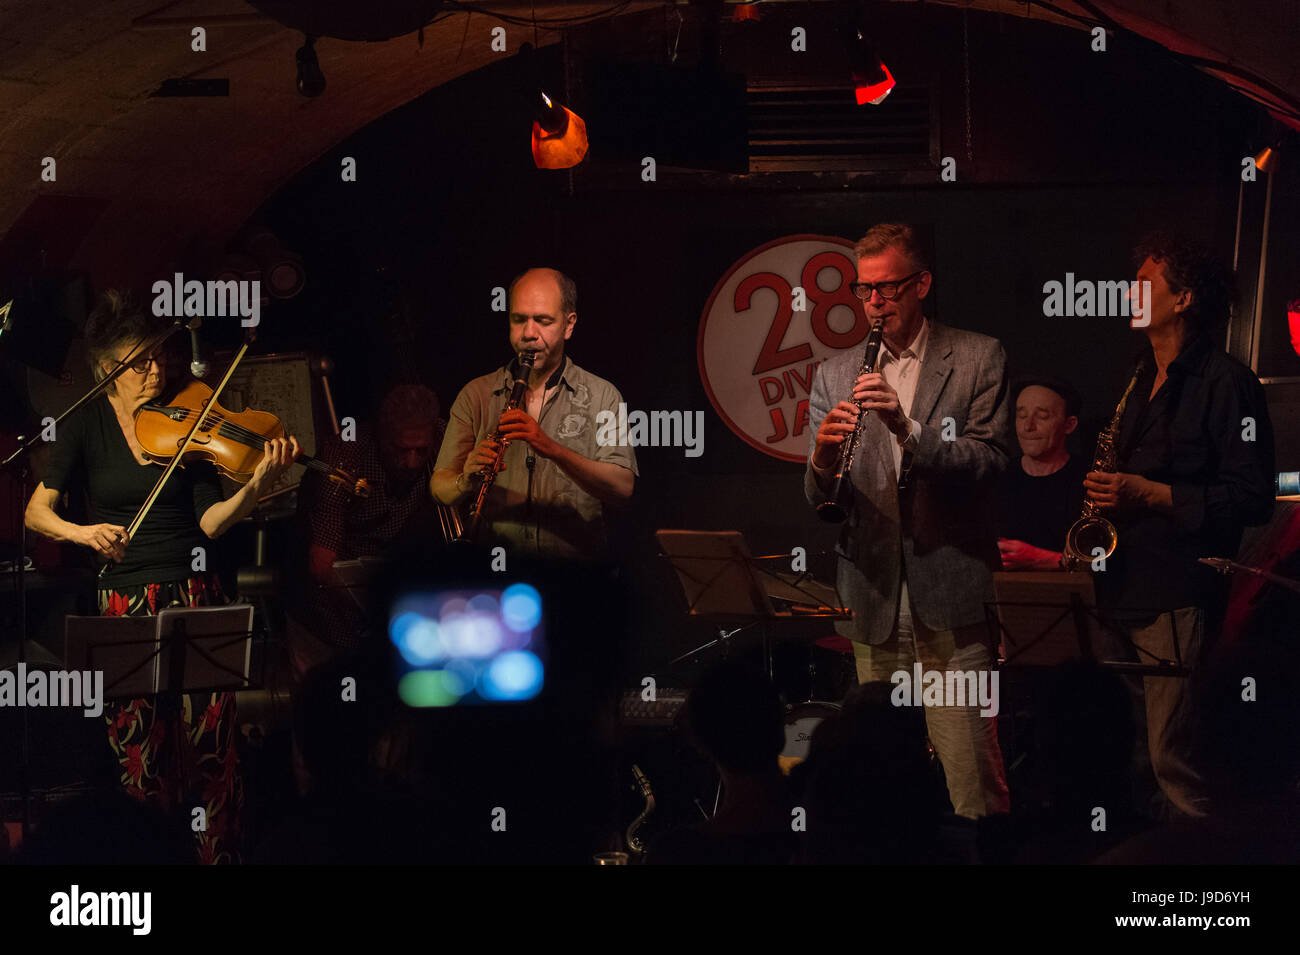 Rome, Italy. 01st June, 2017. The band composed by: Alberto Popolla with clarinet and basso clarinet, Errico De Fabritiis with high sax and baritone, Gianfranco Tedeschi at double bass and Fabrizio Spera on drums, performed on 31/5/2017 on the stage of the 28DiVino jazz club in Rome. With them on stage Ig Henneman to violet and Ab Baars to tenor sax, clarinet and shakuhachi. Credit: Leo Claudio De Petris/Pacific Press/Alamy Live News Stock Photo